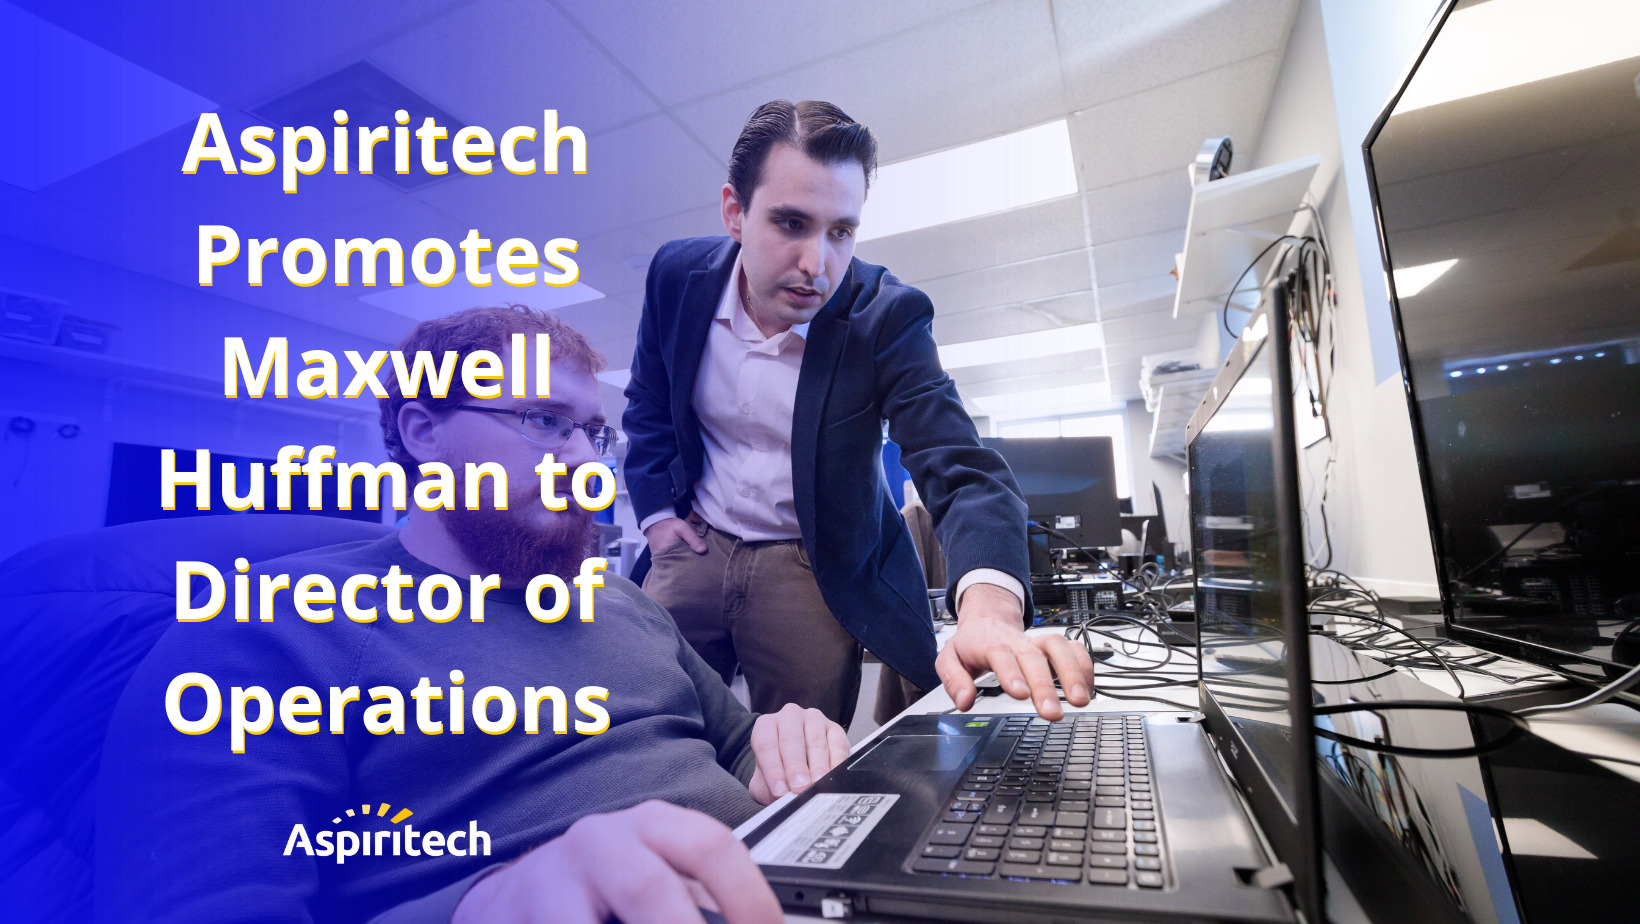 Text on the lefthand side reads, "Aspiritech Promotes Maxwell Huffman to Director of Operations" over an image of Maxwell standing by a seated peer. Maxwell points to keys on the laptop in front of his peer.